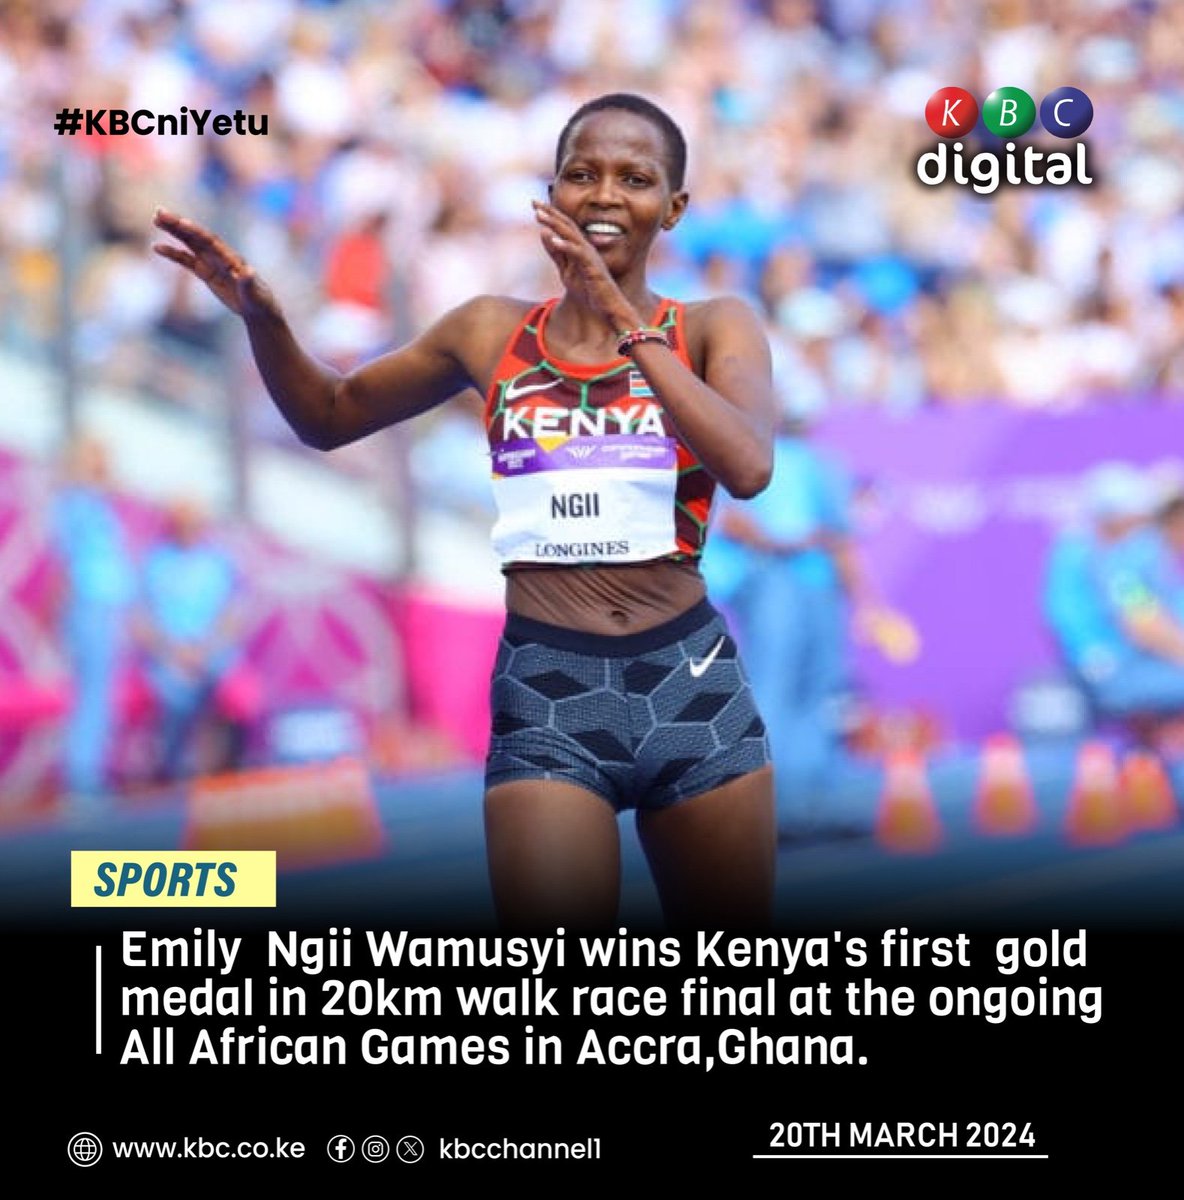 Emily Ngii Wamusyi wins first Kenya's gold medal in 20km walk race final at the ongoing All African Games in Accra, Ghana. #KBCniYetu ^RO